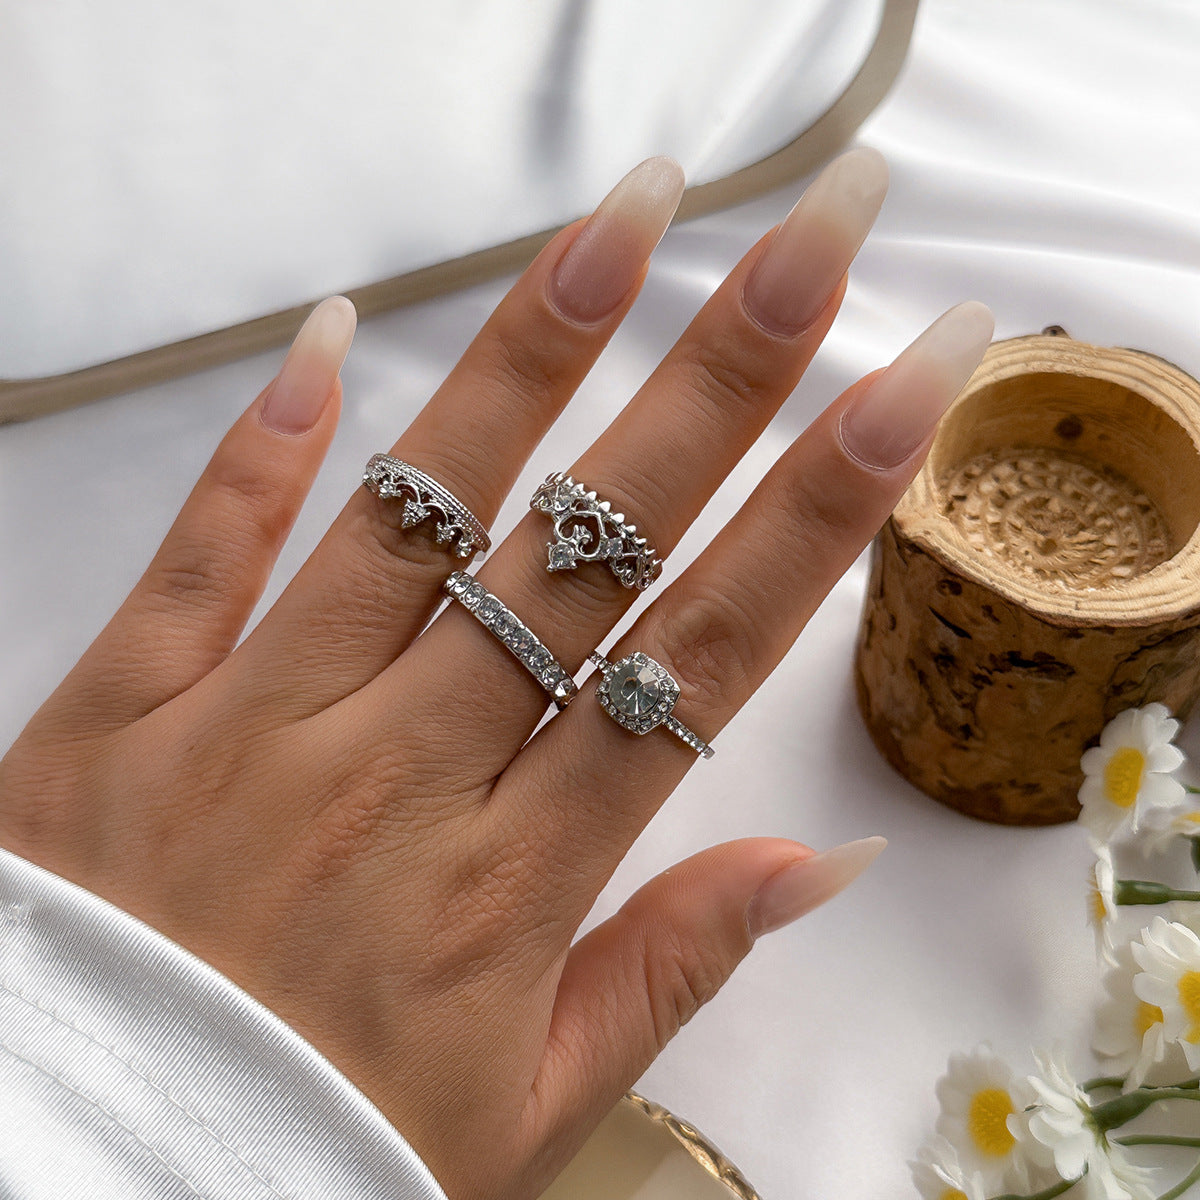 French Pastoral Heart-shaped Diamond Ring with Floral Crown Set Europe and US Cross-border Jewelry.